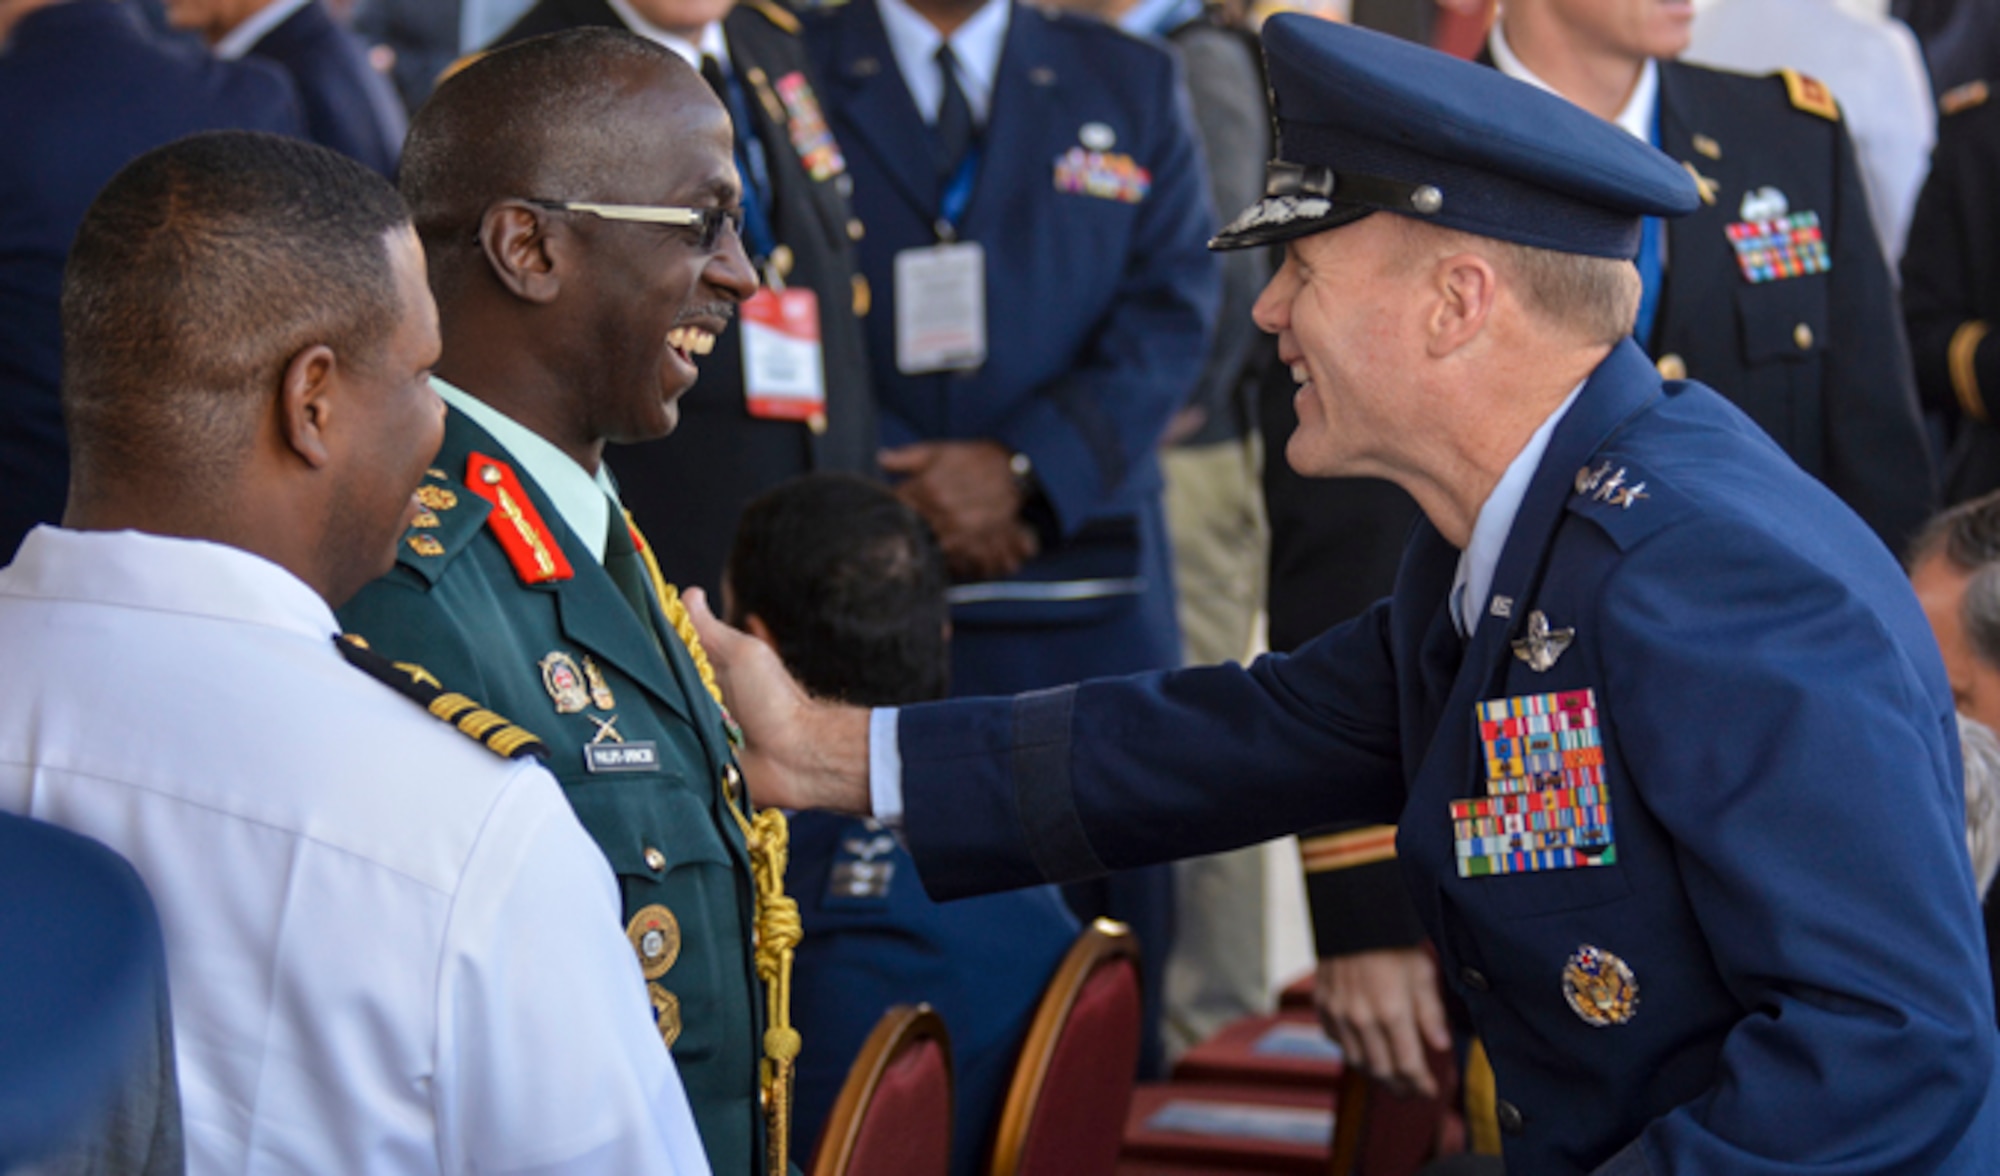 Lt. Gen. Tod Wolters, the 12th Air Force (Air Forces Southern) commander, greets Brig. Gen. Anthony Phillips-Spencer, vice chief of Defence Staff of the Trinidad and Tobago Defence Force, just before the FIDAE Air Show opening ceremony, March 25, 2014, in Santiago, Chile. Nearly 60 Airmen are participating in subject matter expert exchanges with Chilean air force counterparts during FIDAE. The exchanges involve U.S. Airmen sharing best practices and procedures to build partnerships and promote interoperability with partner-nations throughout South America, Central America and the Caribbean. (U.S. Air Force photo/Capt. Justin Brockhoff)